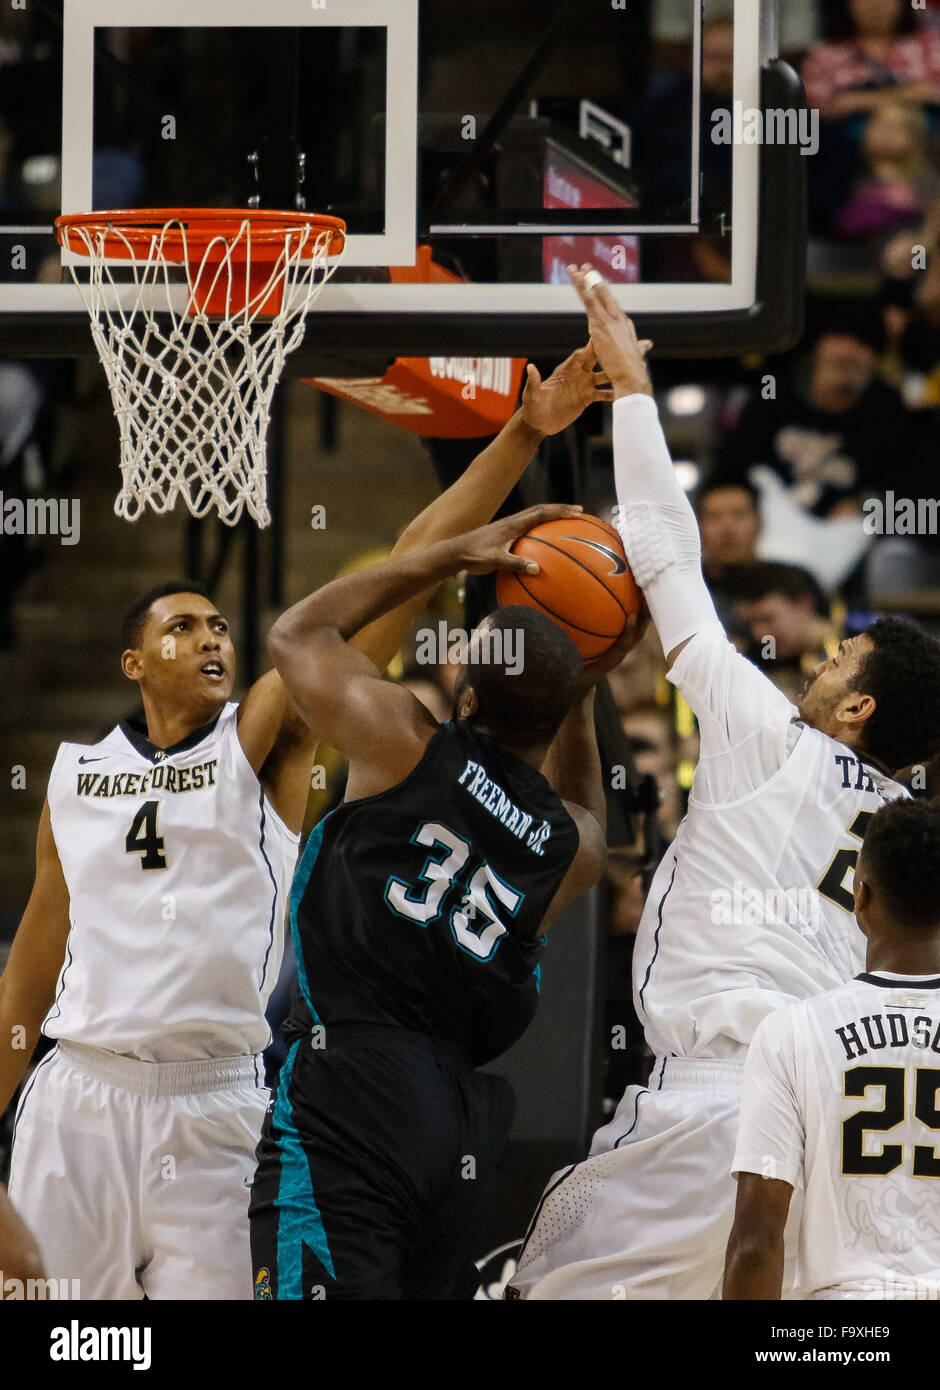 Winston-Salem, NC, USA. 18th Dec, 2015. Marcus Freeman (35) of the Coastal Carolina Chanticleers goes up against Doral Moore (4) and Devin Thomas (2) of the Wake Forest Demon Deacons in the NCAA Basketball match-up between the Coastal Carolina Chanticleers and the Wake Forest Demon Deacons at Lawerence Joel Veteran Memorial Coliseum in Winston-Salem, NC. Scott Kinser/CSM/Alamy Live News Stock Photo